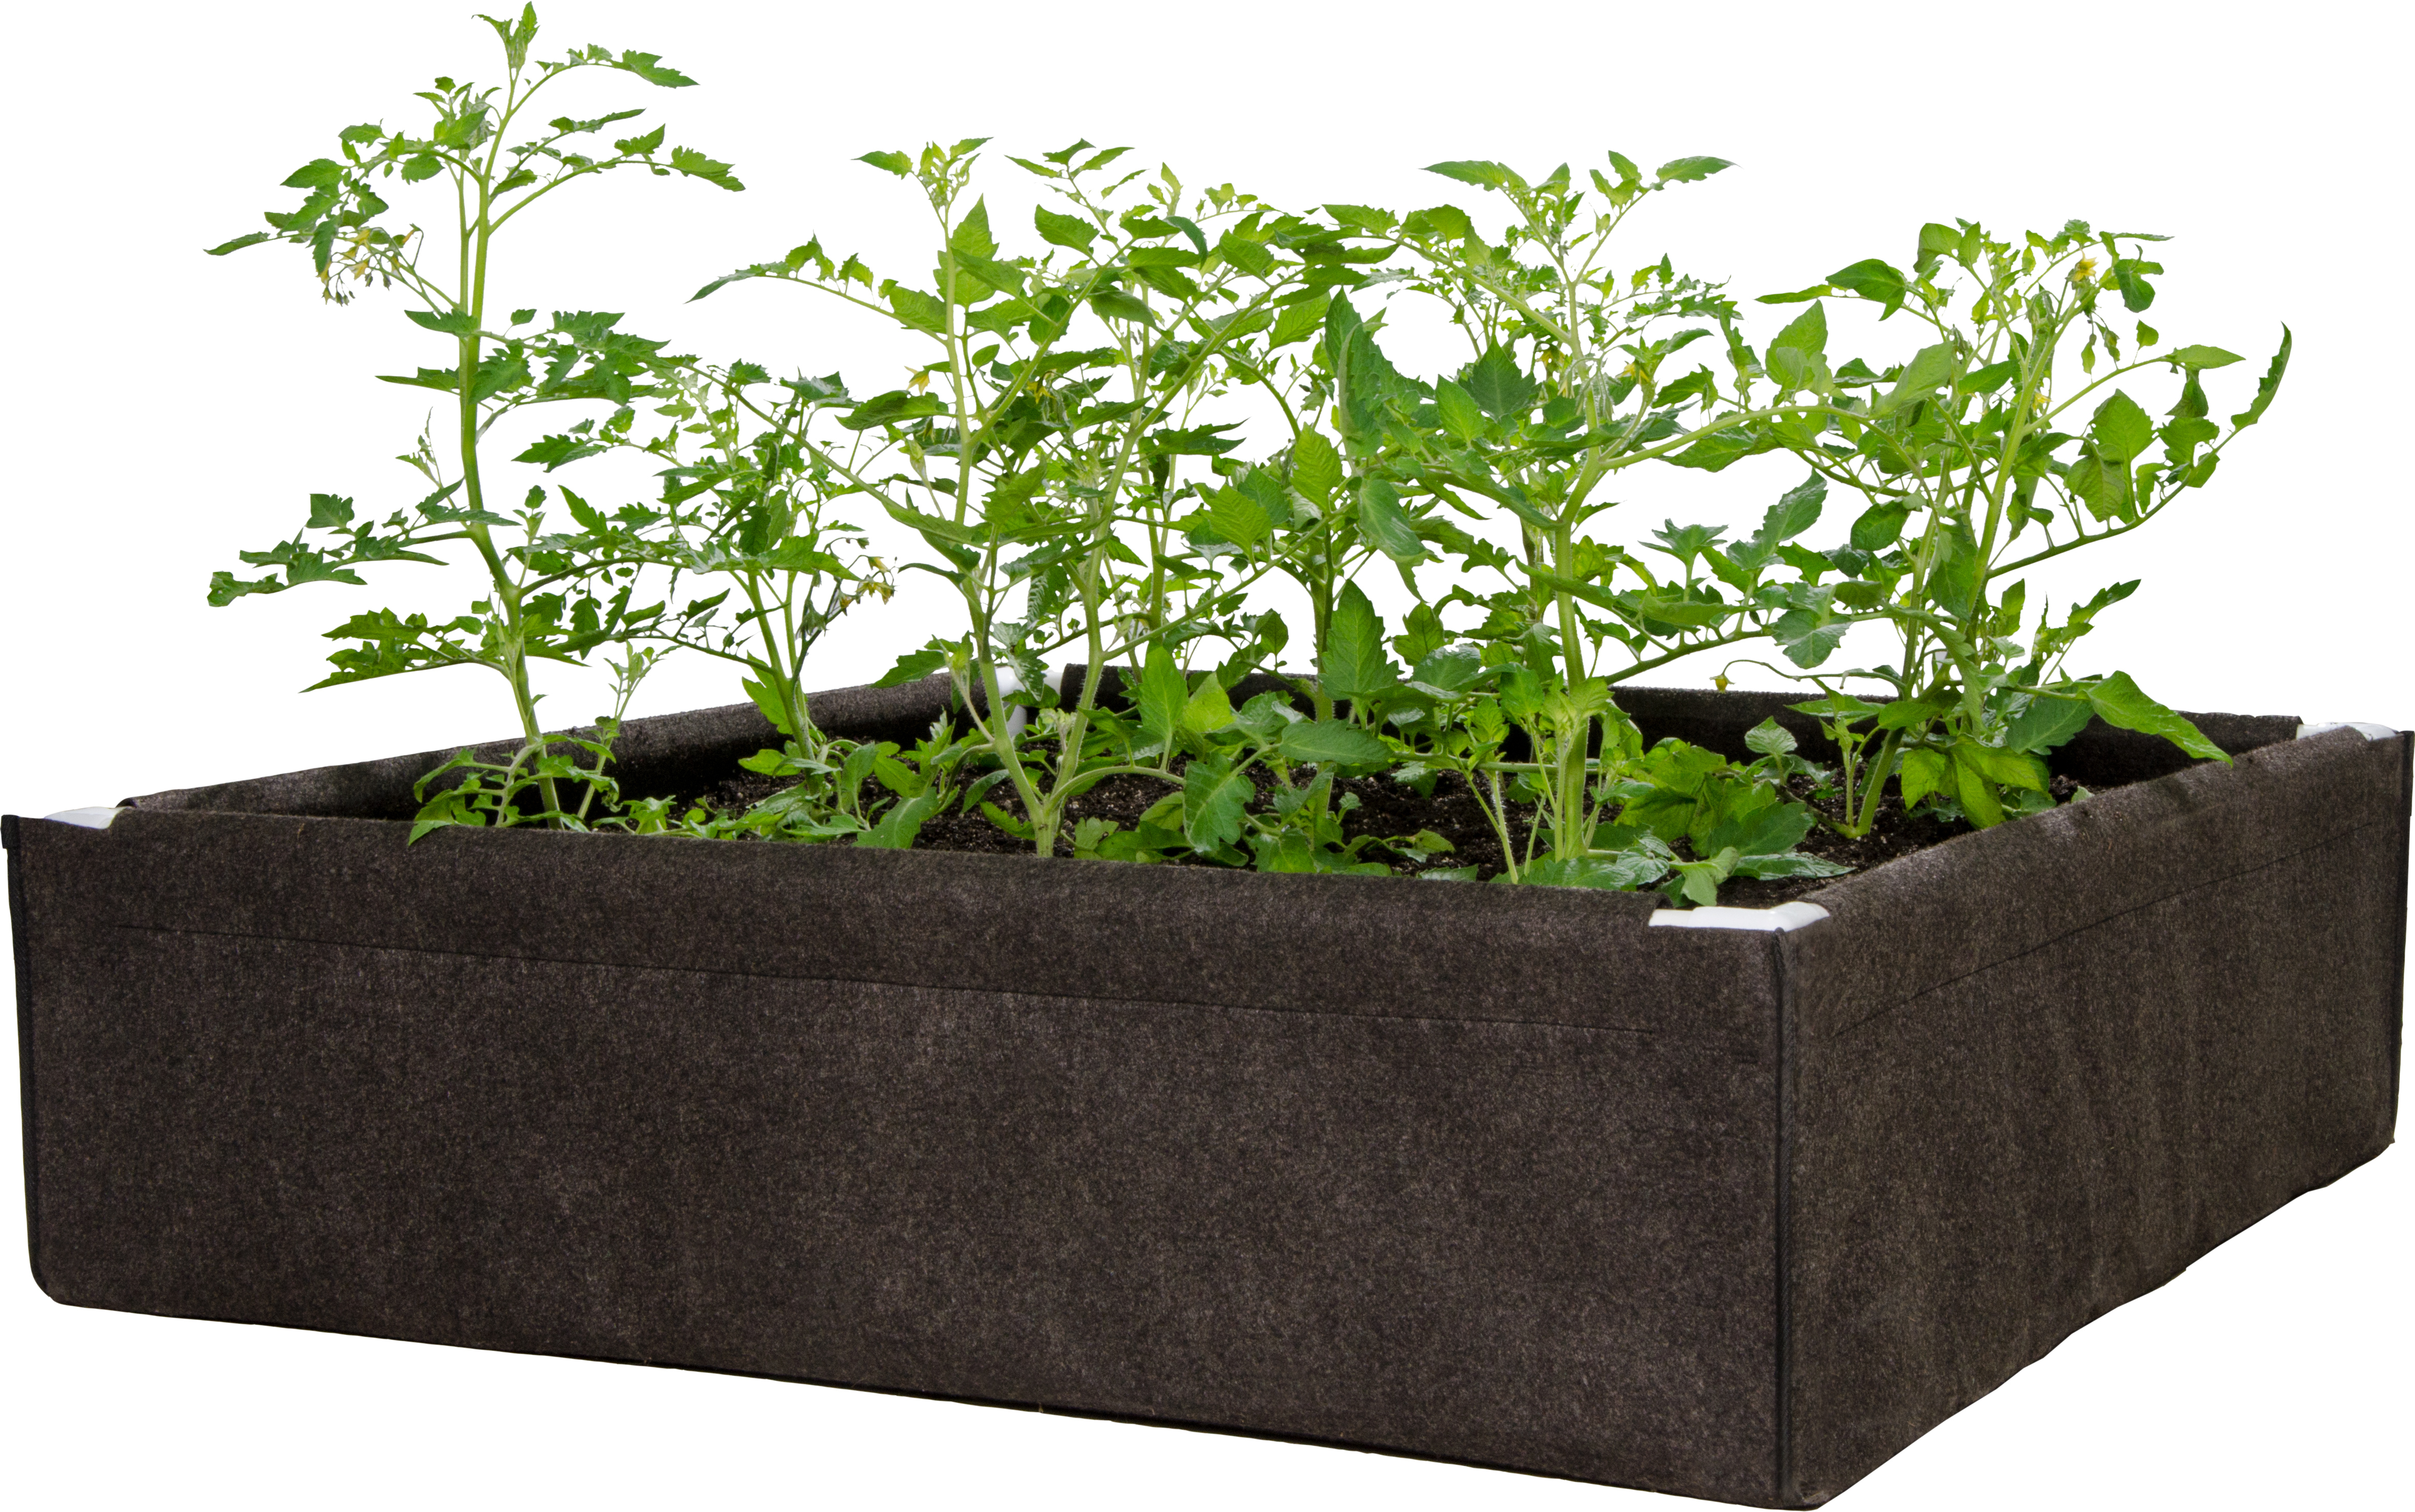 Picture for Dirt Pot Box, 2' x 4' Raised Bed